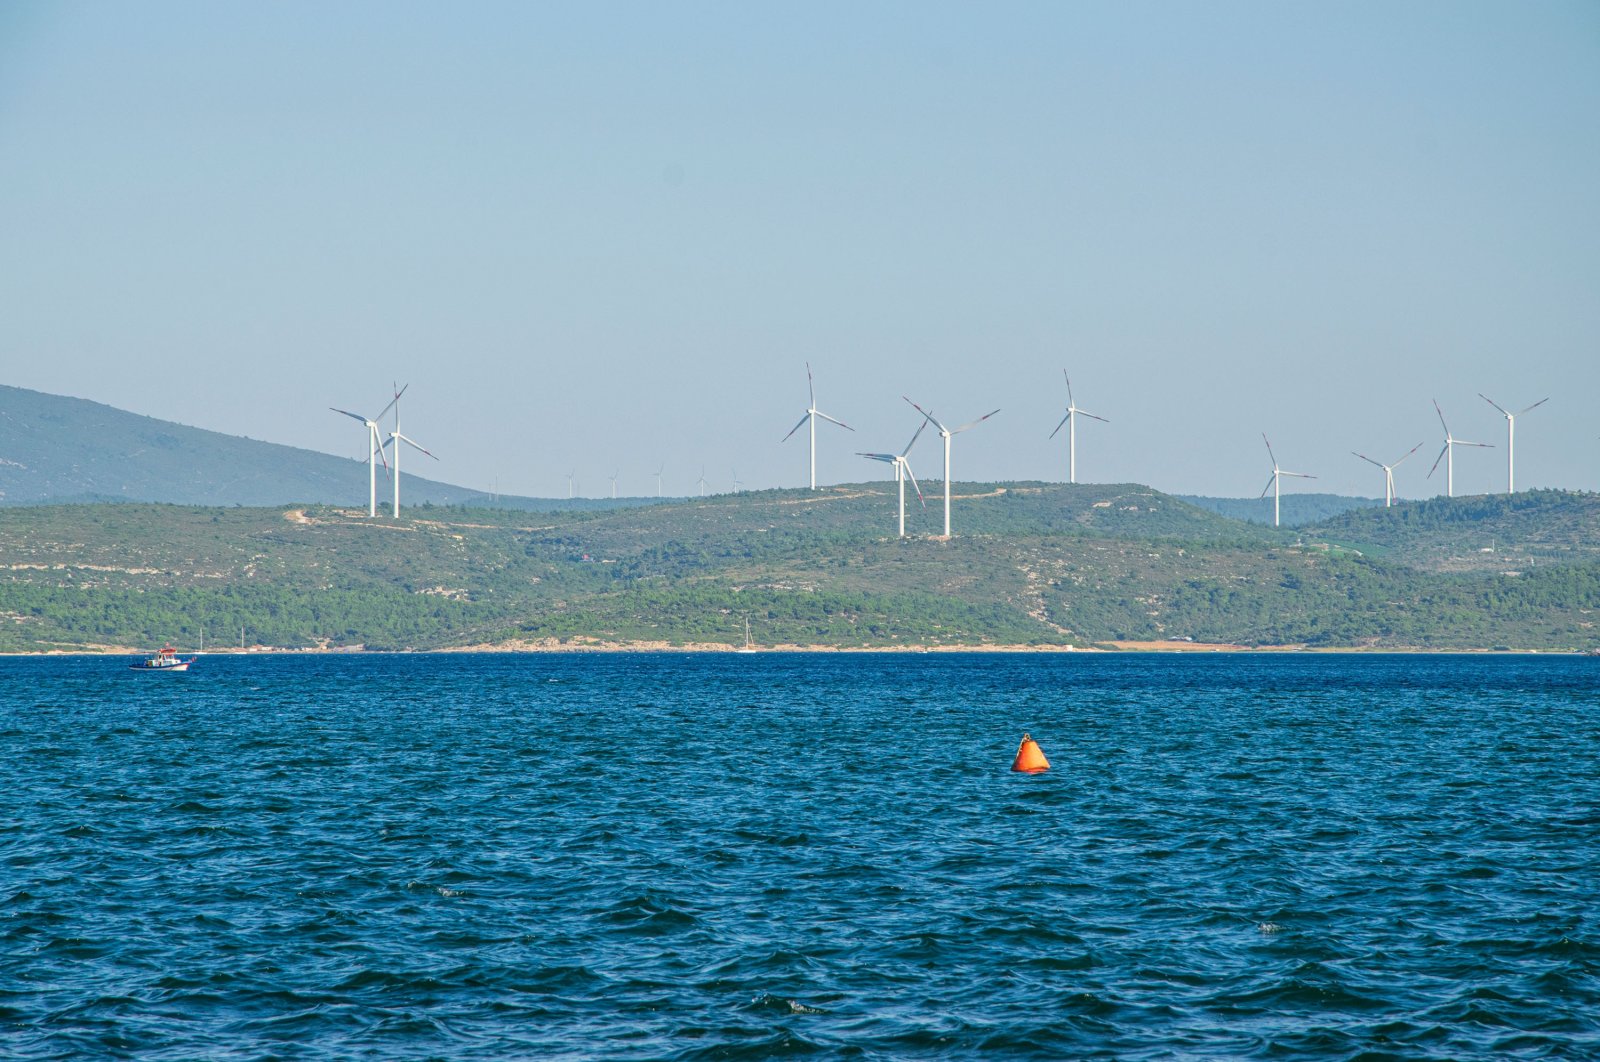 Technical groundwork for Türkiye's 1st offshore wind plant due in 2024 | Daily Sabah - Daily Sabah